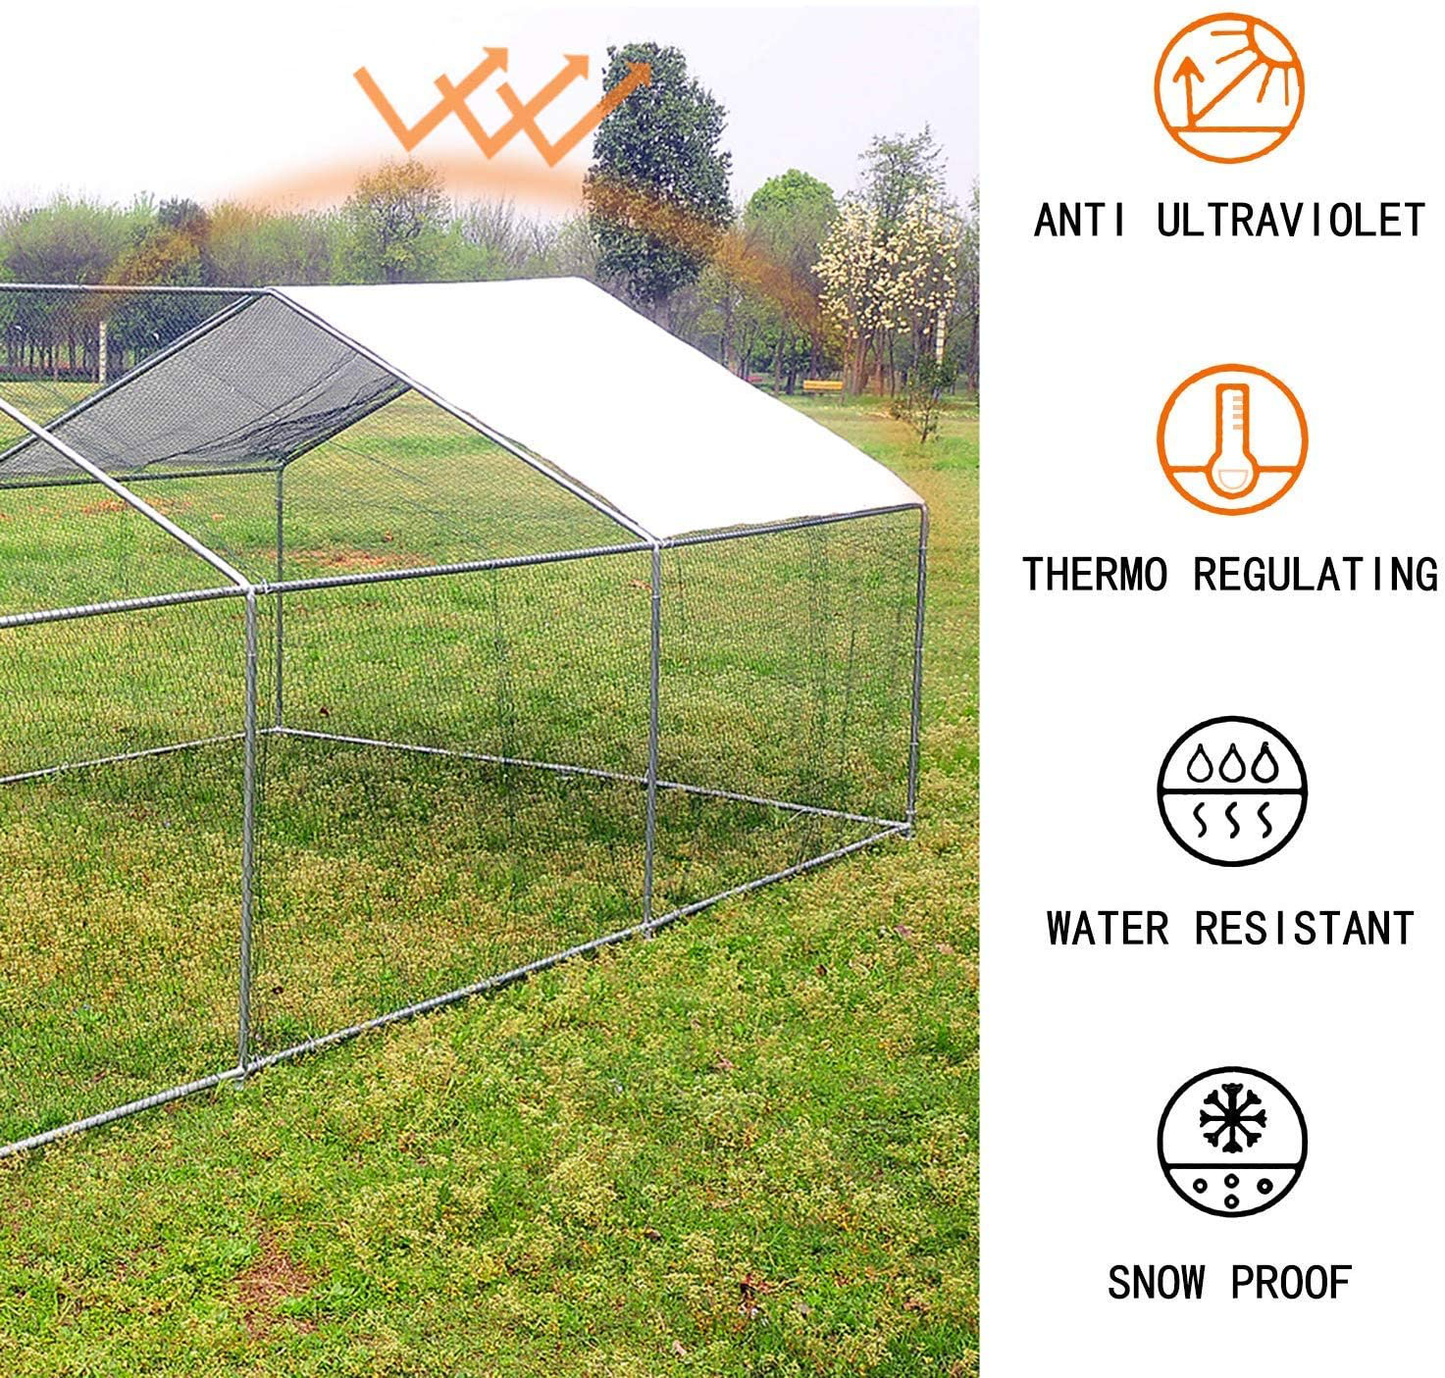 Walsport Large Chicken Run Walk Metal Hen Cage with Waterproof Cover, Enclosure Playpen for Backyard Farm Outdoor